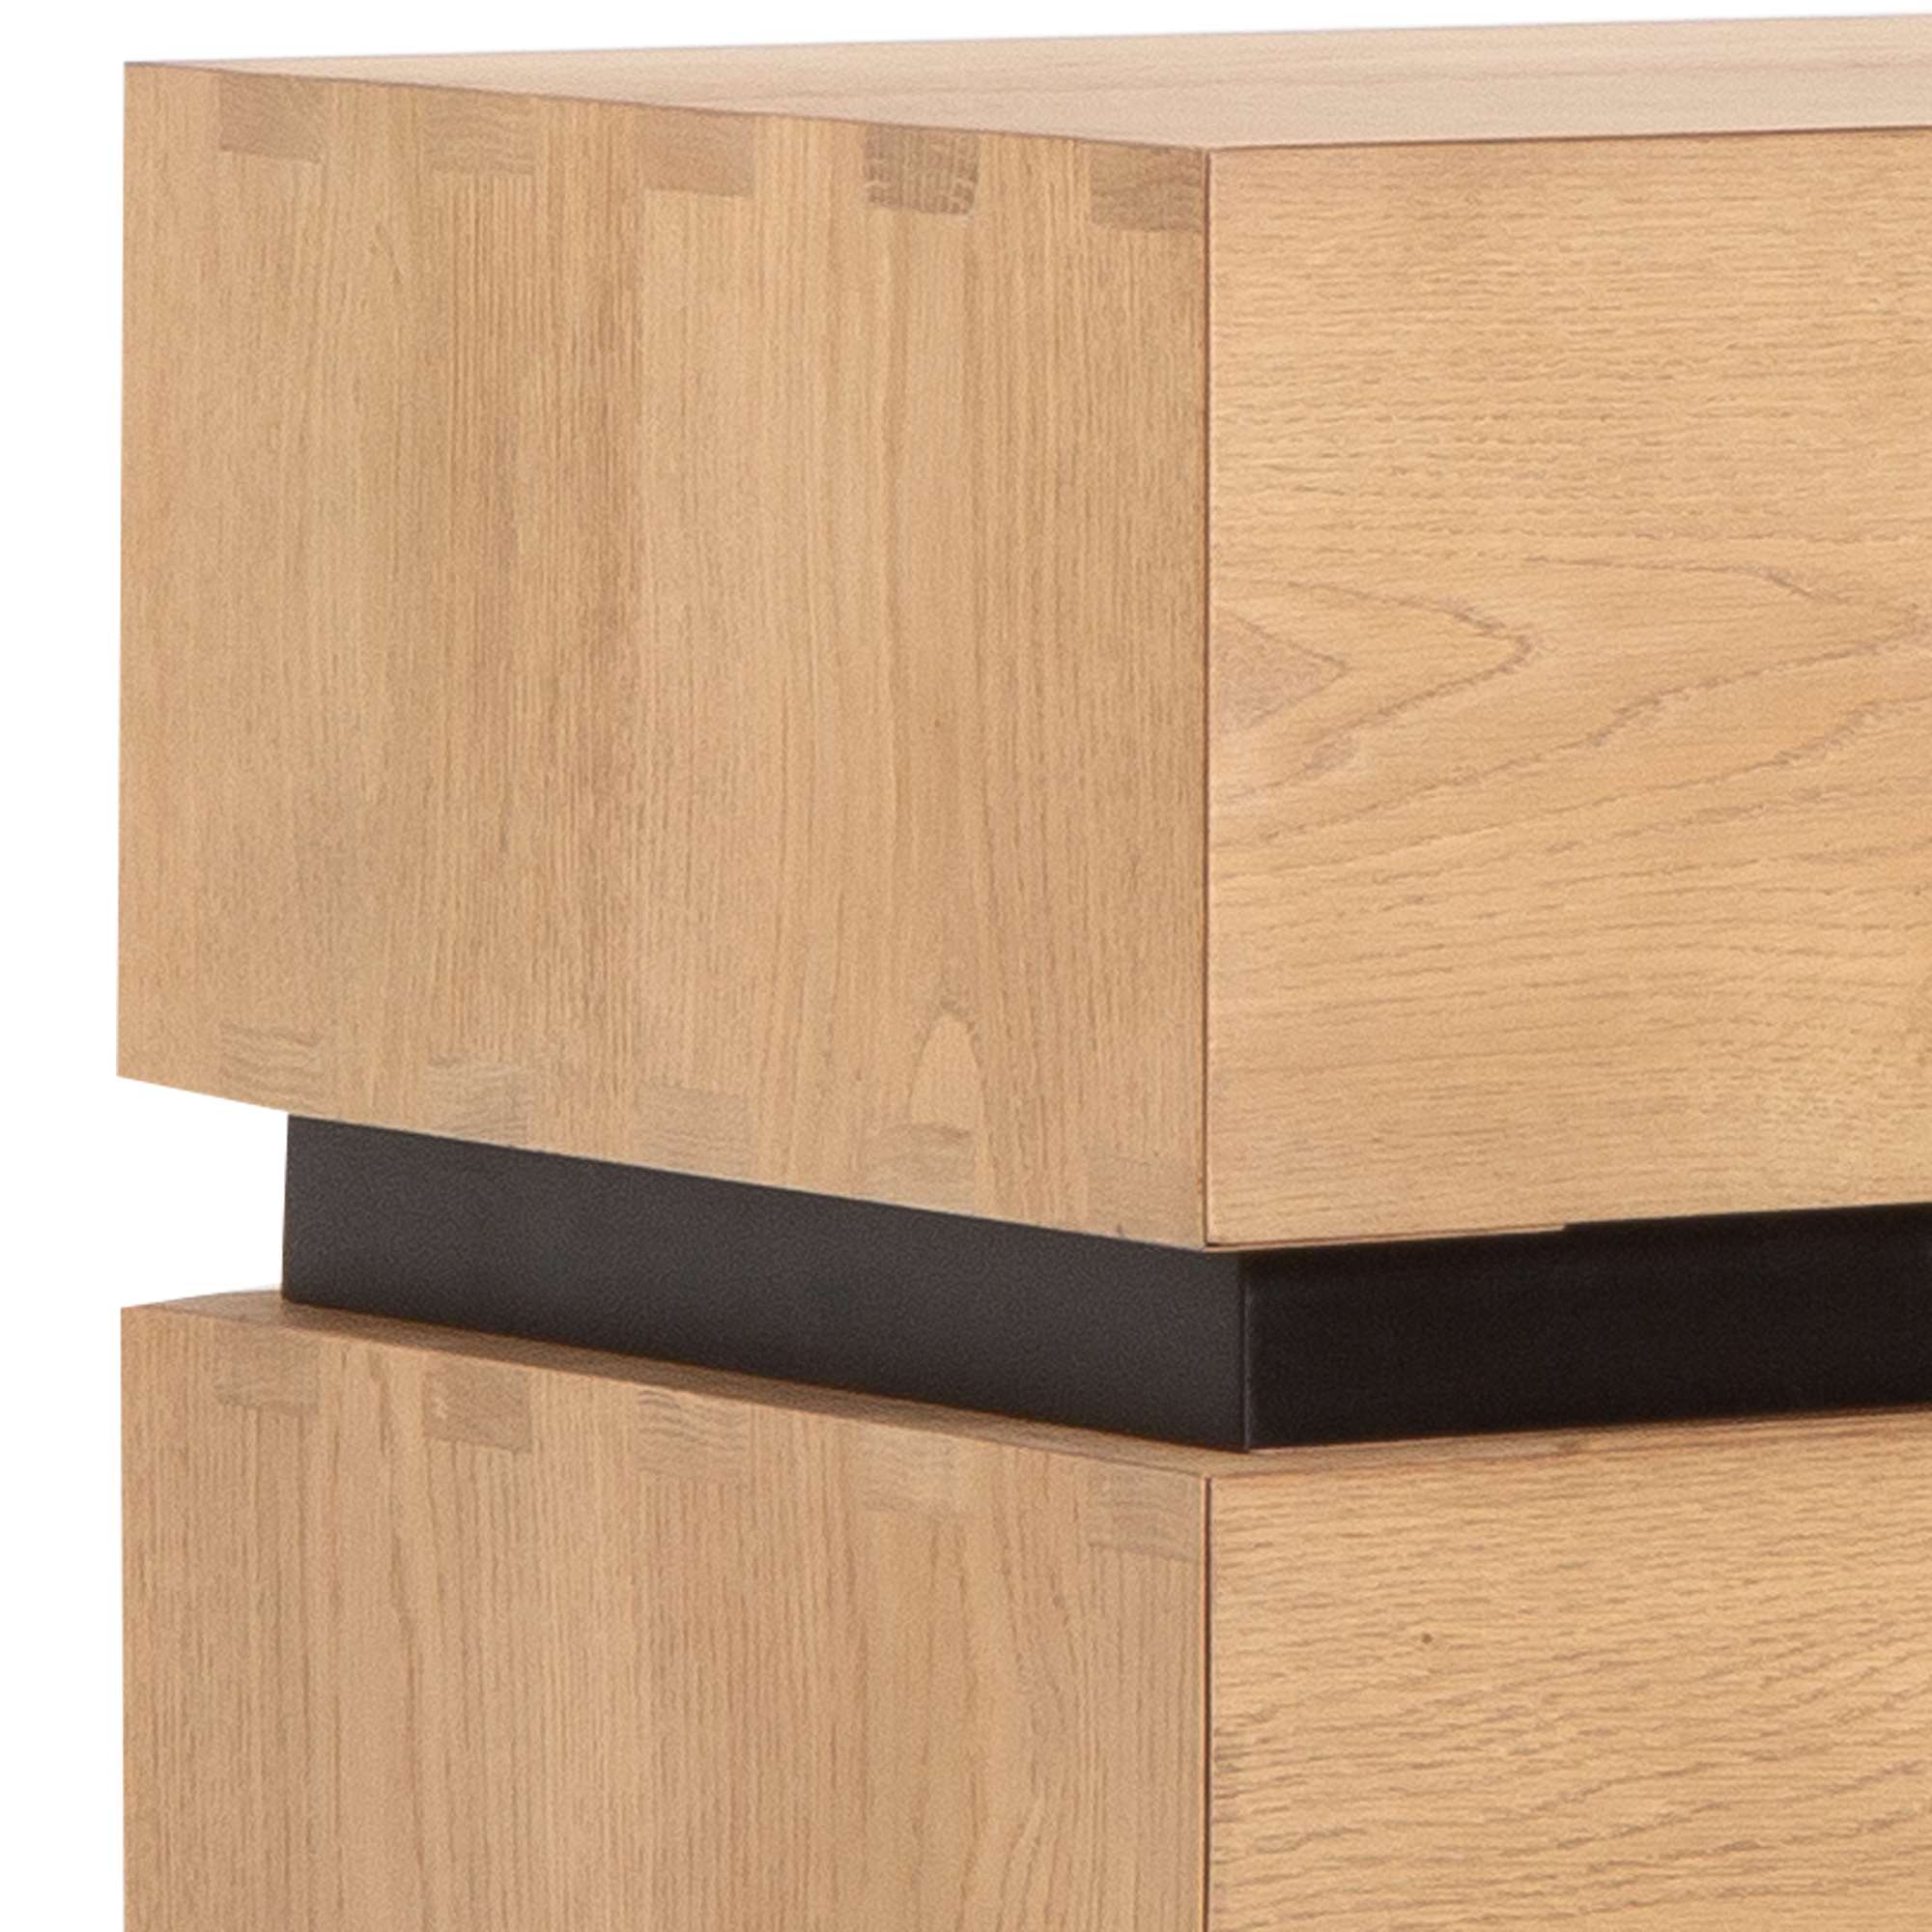 The Cassetto Nightstand draws inspiration from the raw power and geometric precision of 1960s Brutalist architecture.